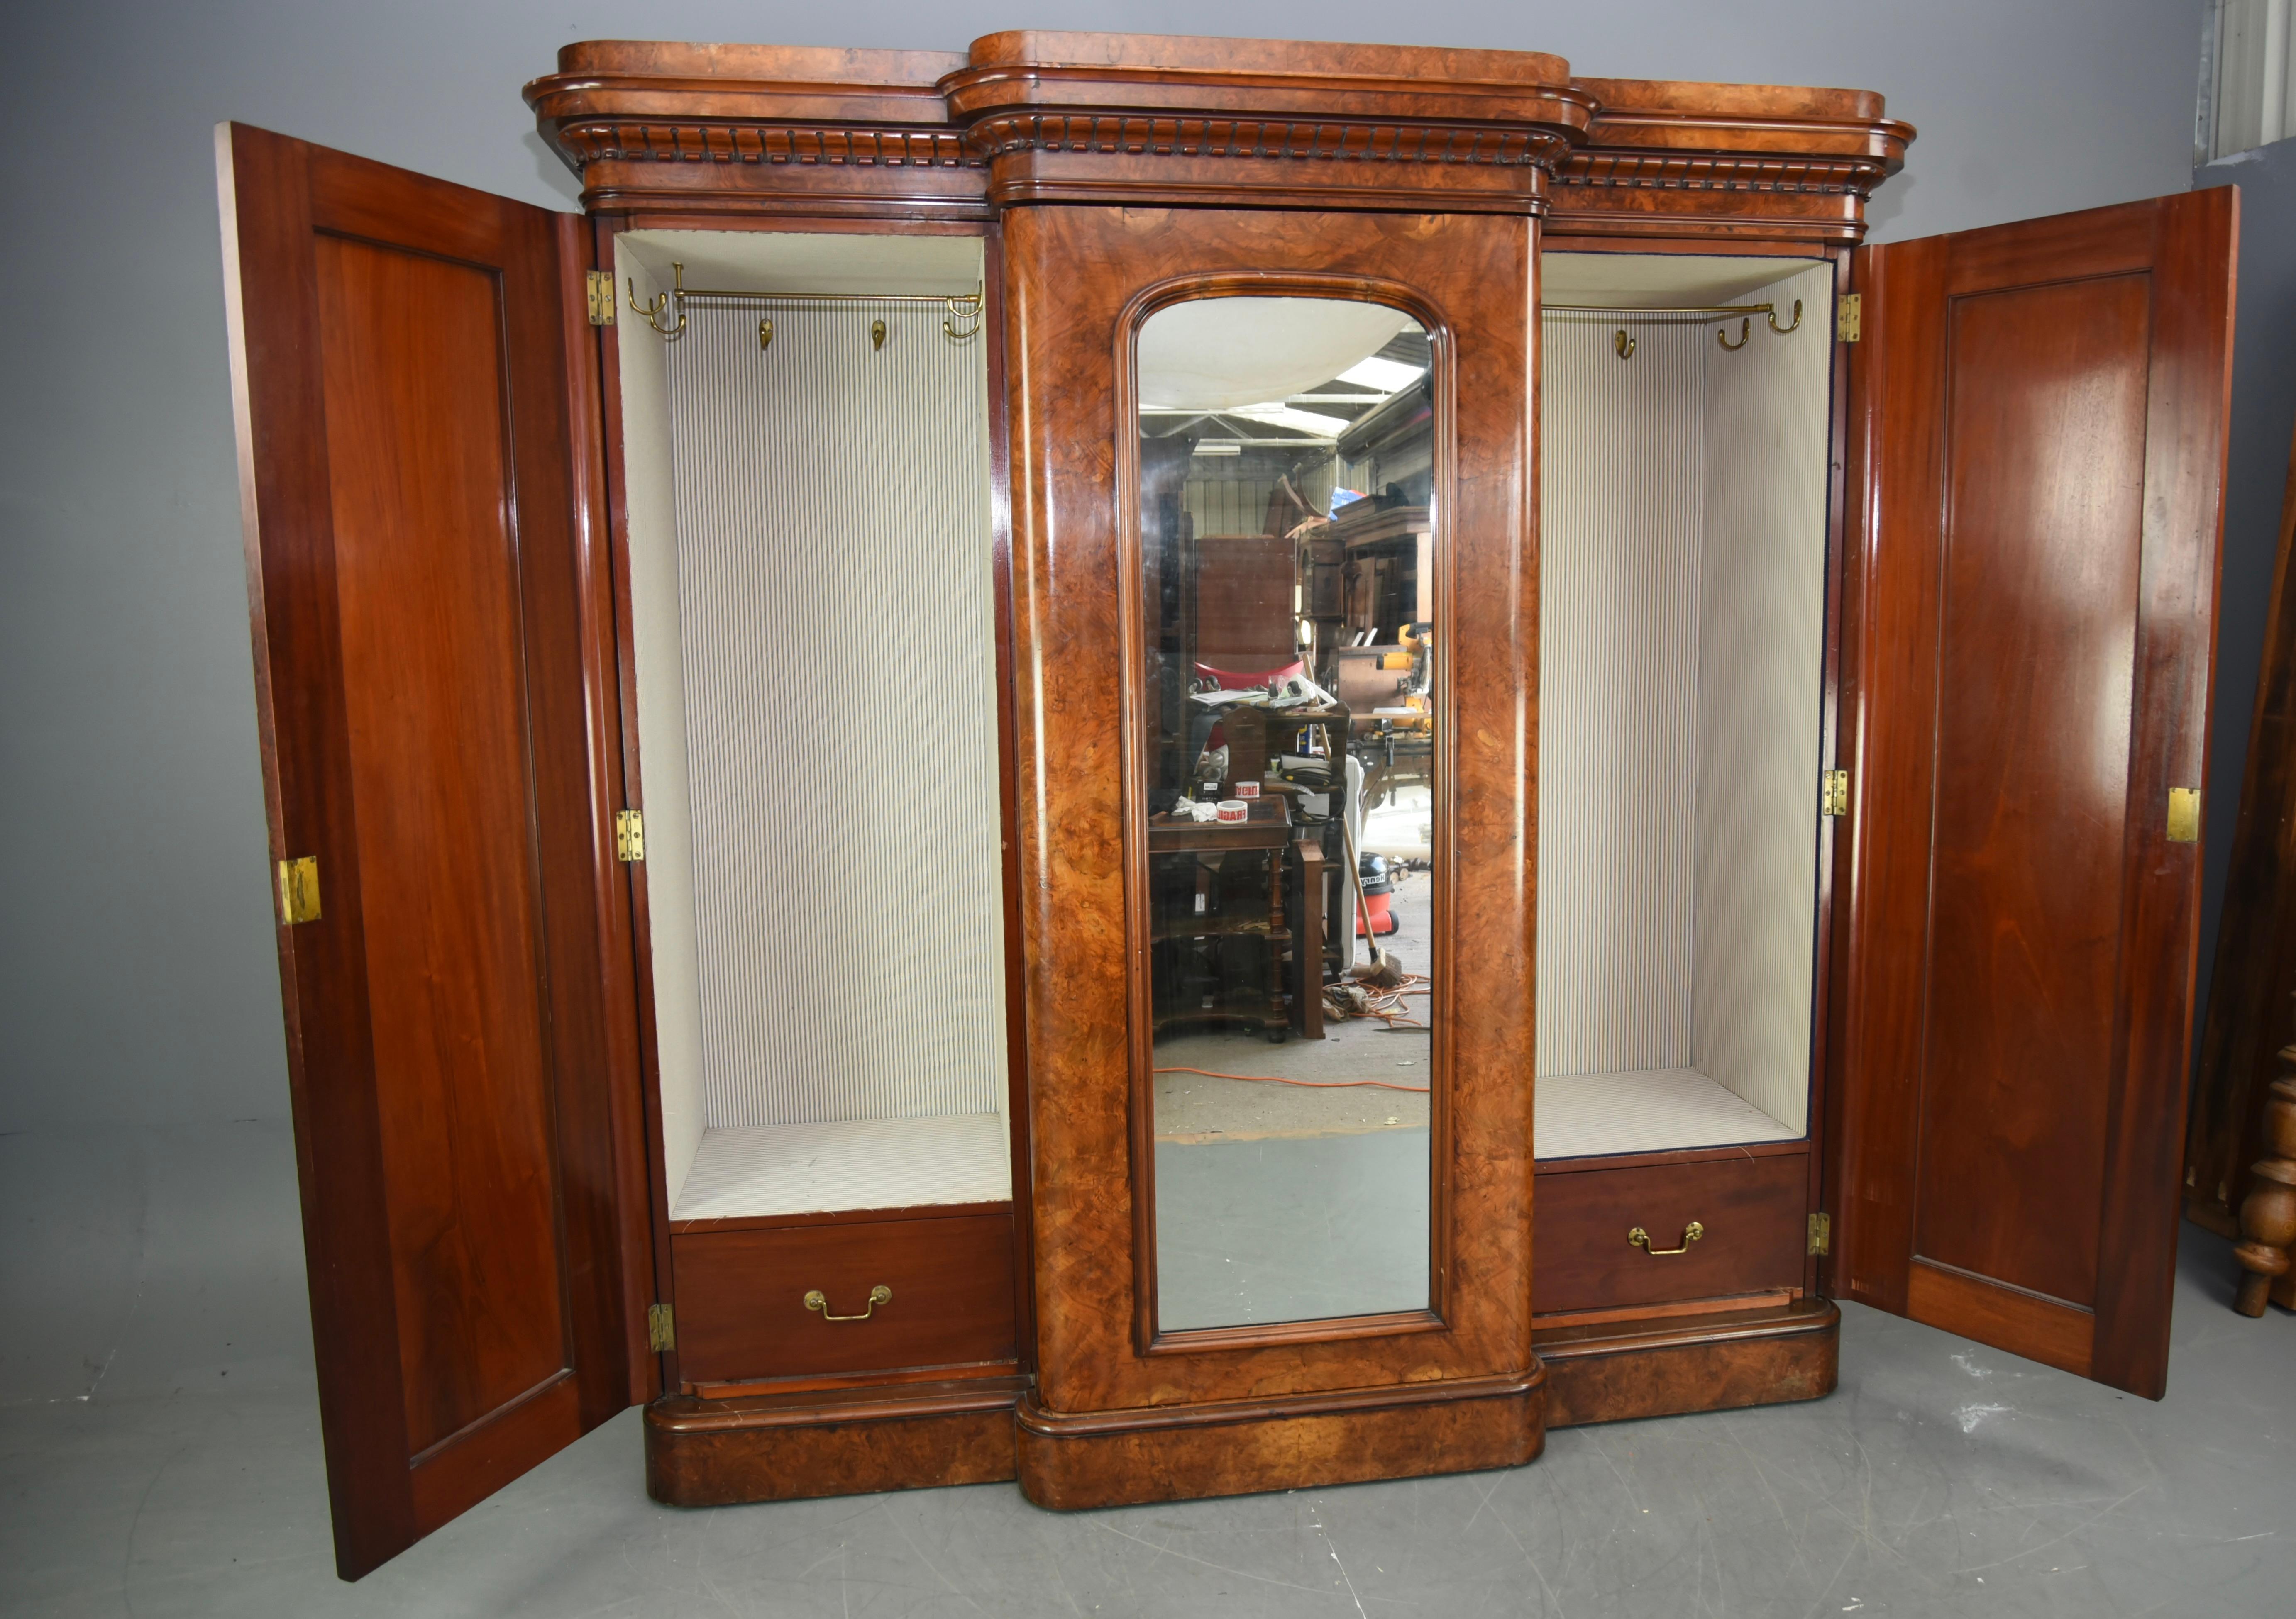 A Superb Victorian Burr walnut triple wardrobe circa 1860.
The wardrobe has fantastic figuring and colour of the finest quality.
The wonderful rounded corner cornice has very fine carved detailing that is only seen on the best Antique furniture